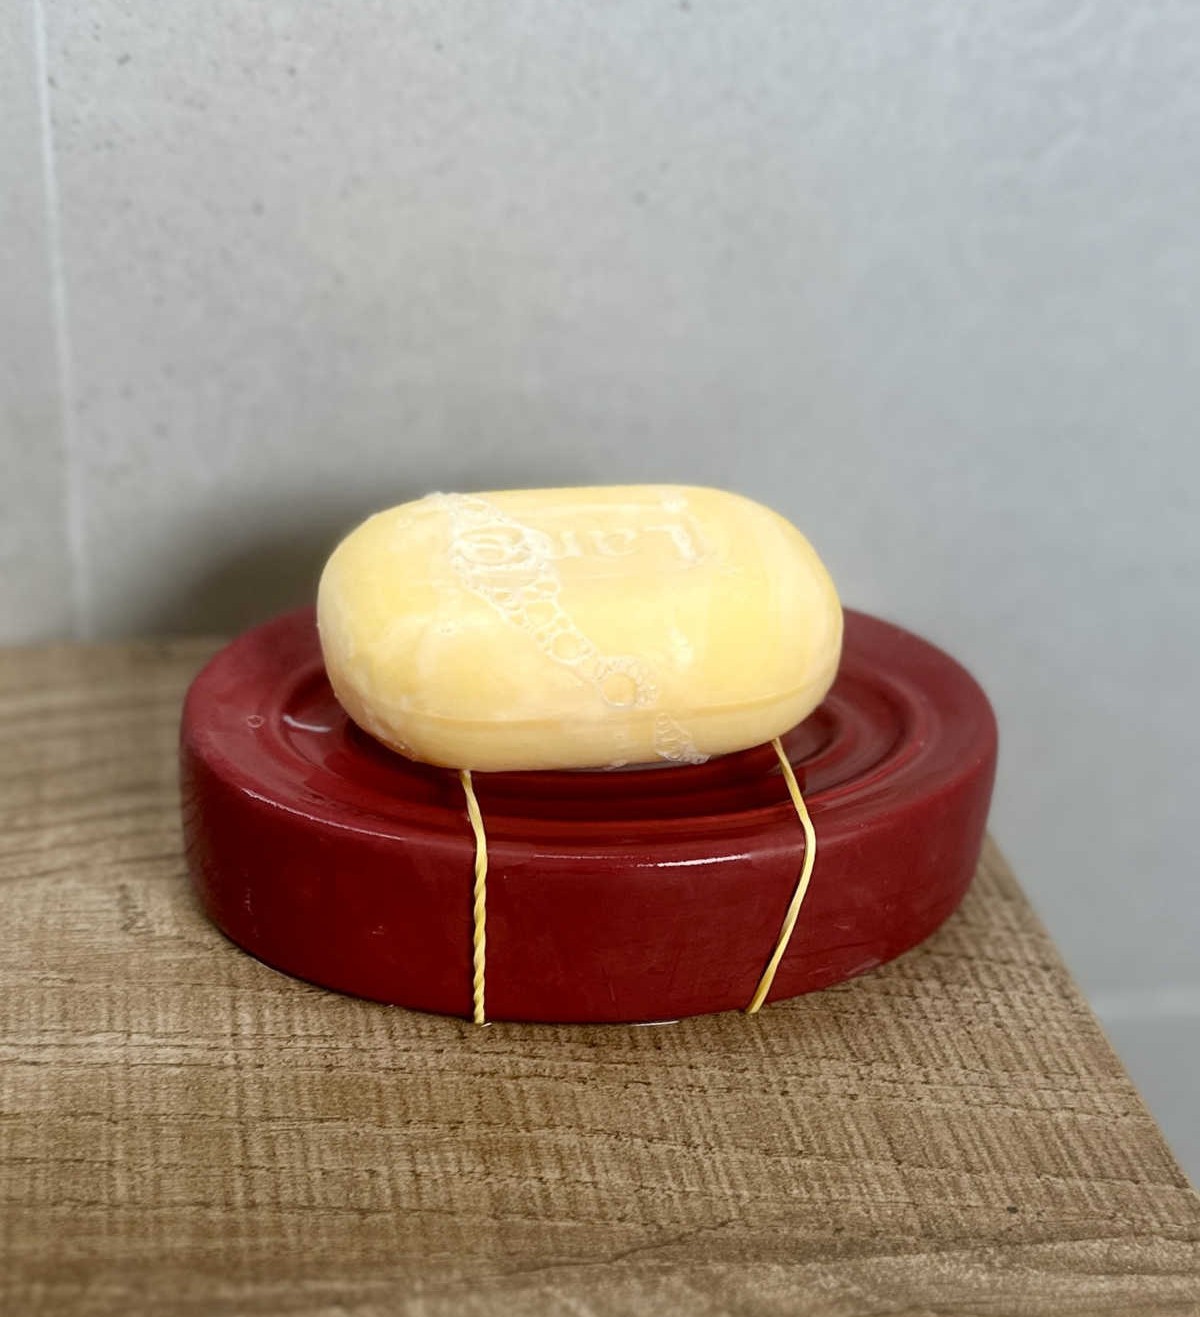 Keep the Bar of Soap Clean with Two Rubber Bands